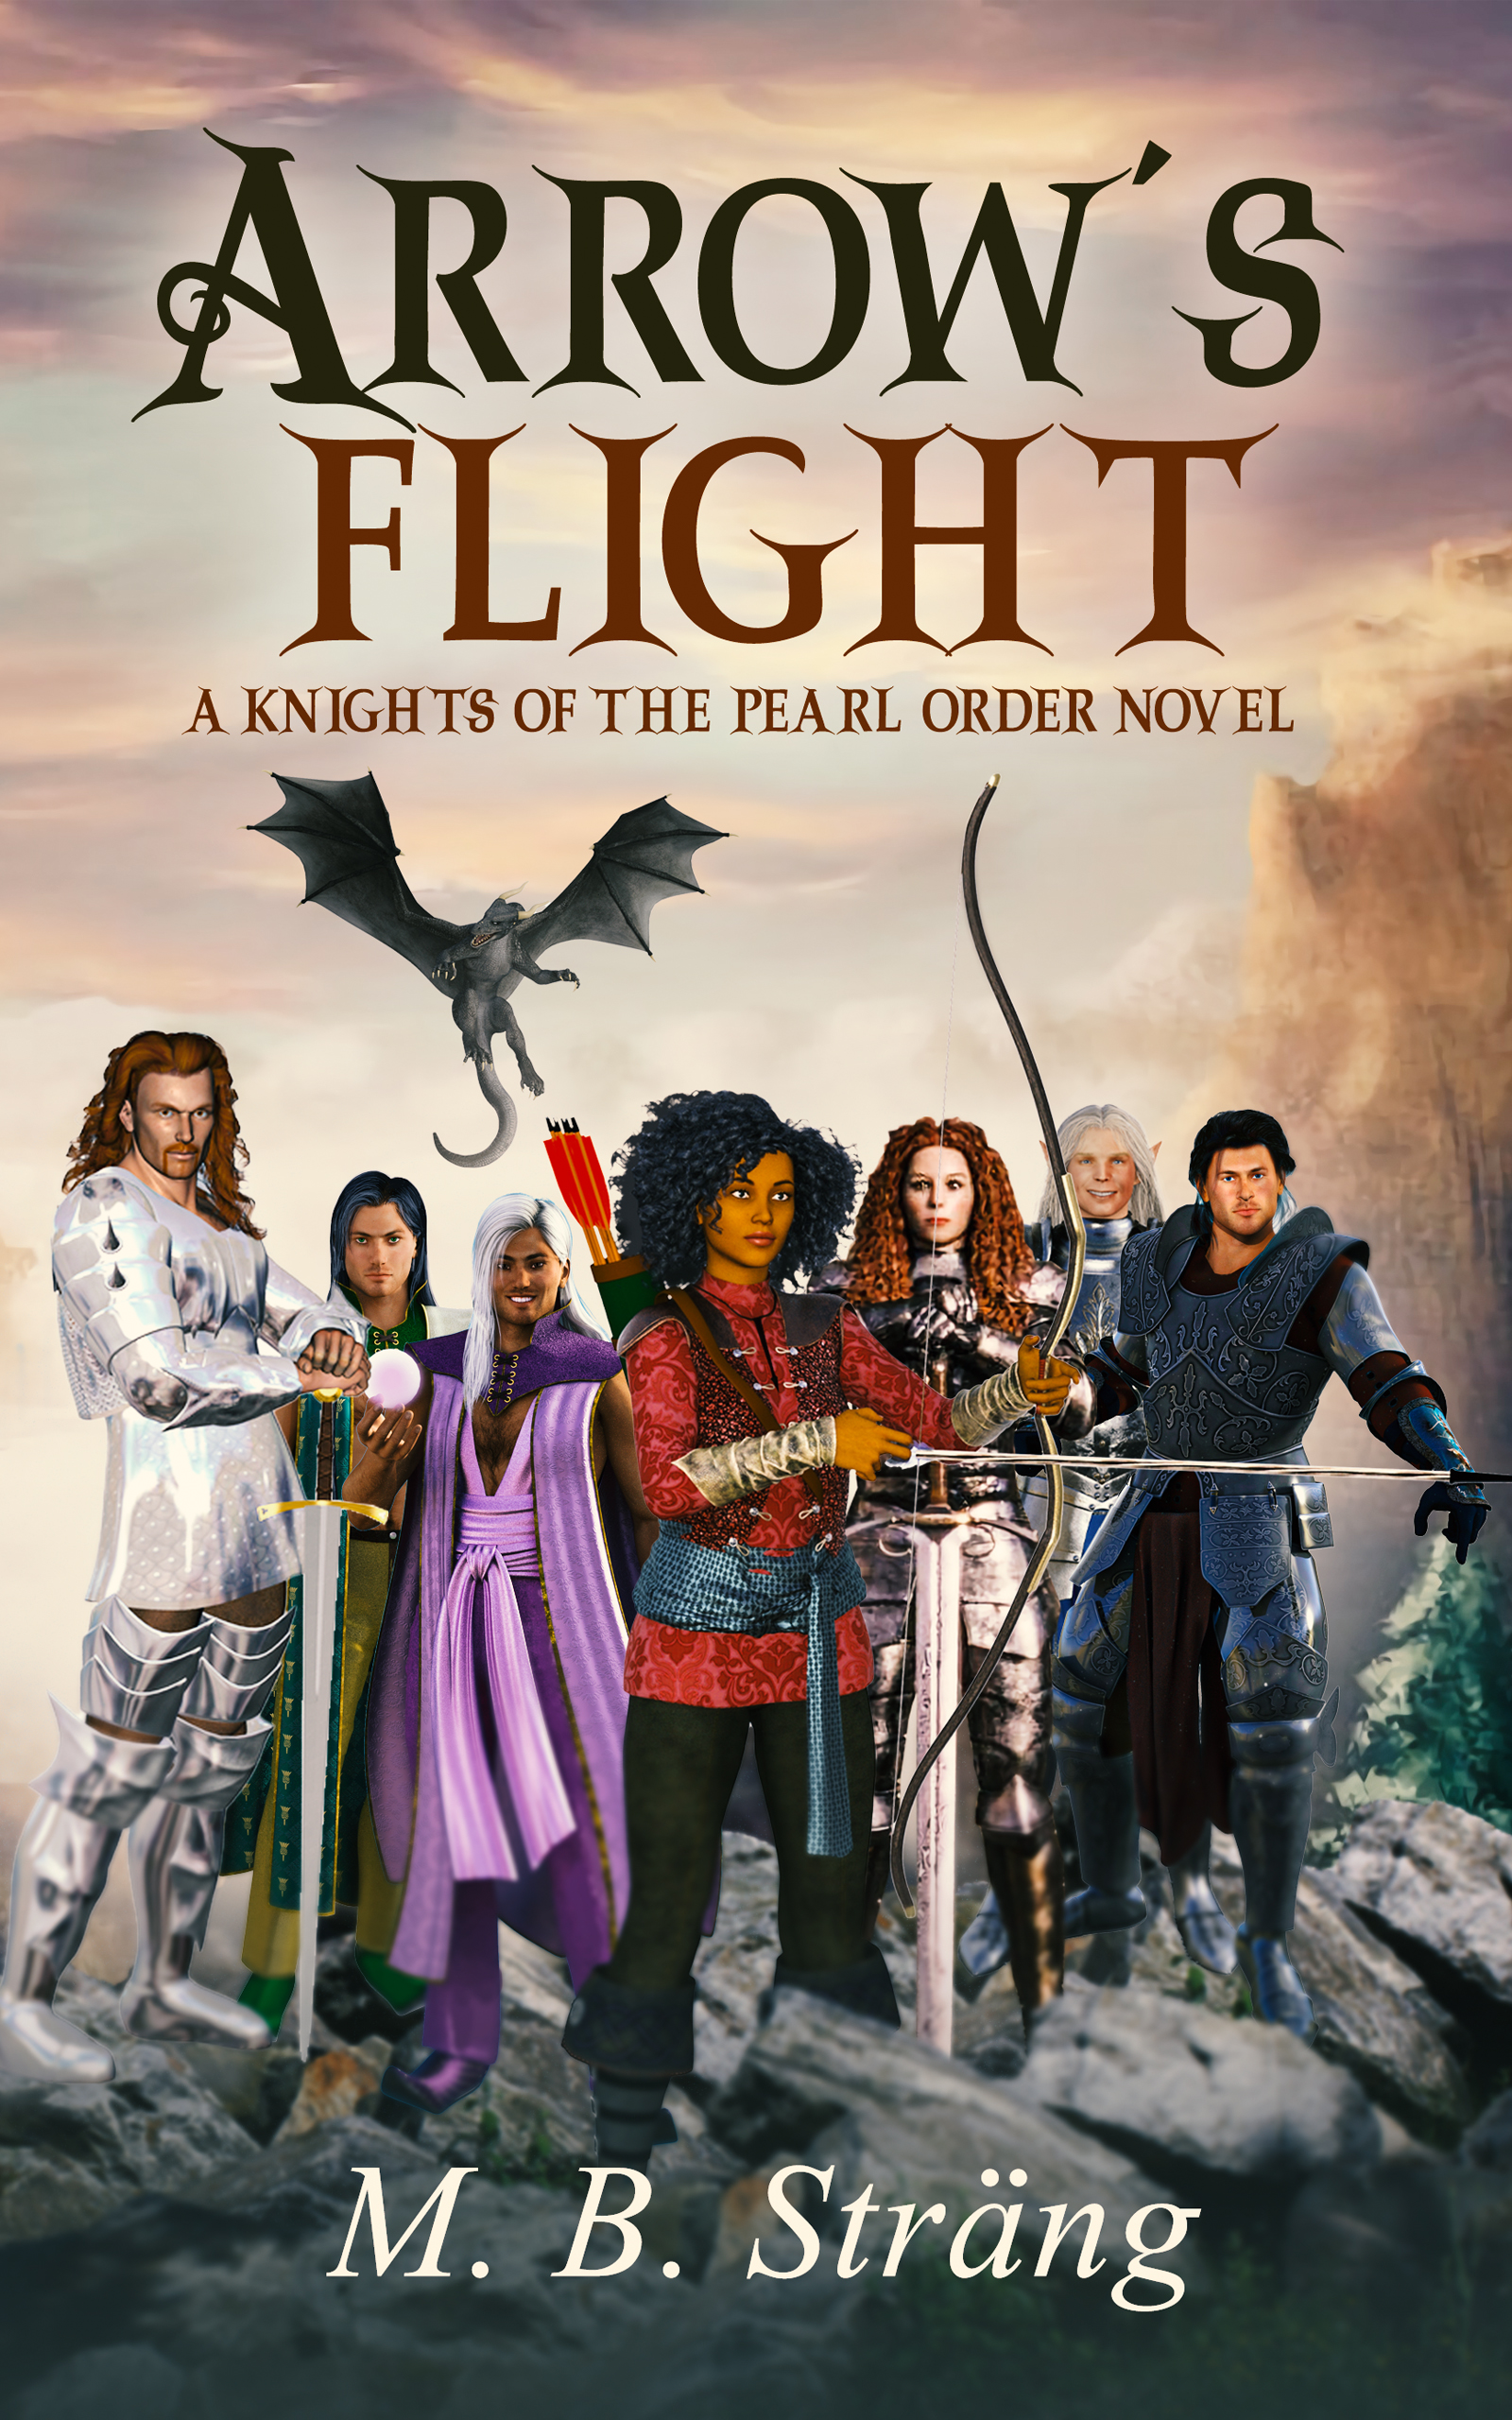 Cover for the book Arrow's Flight by M.B. Strang